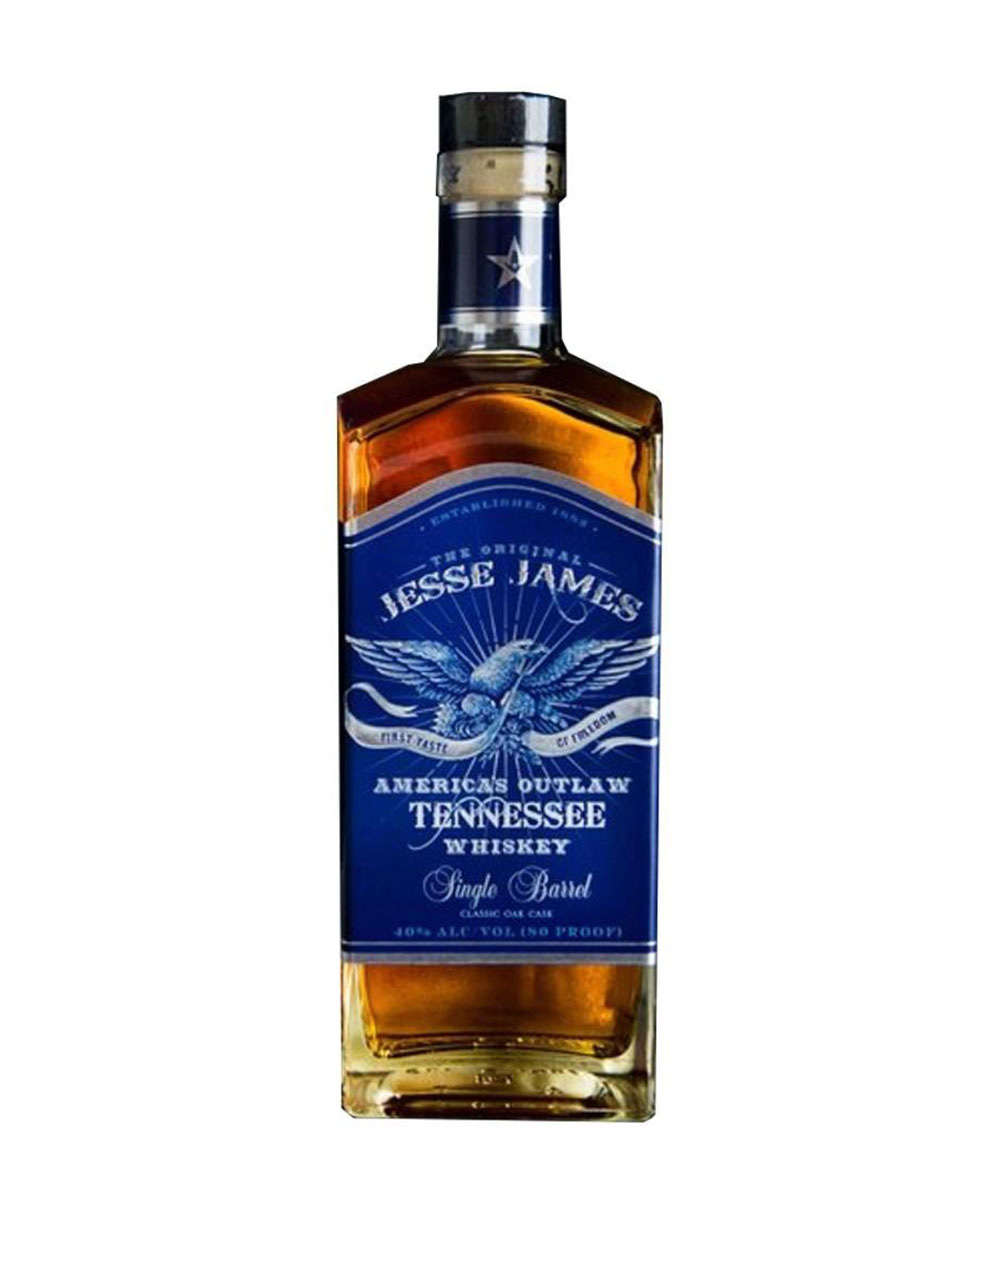 Jesse James American Outlaw Tennessee Whiskey